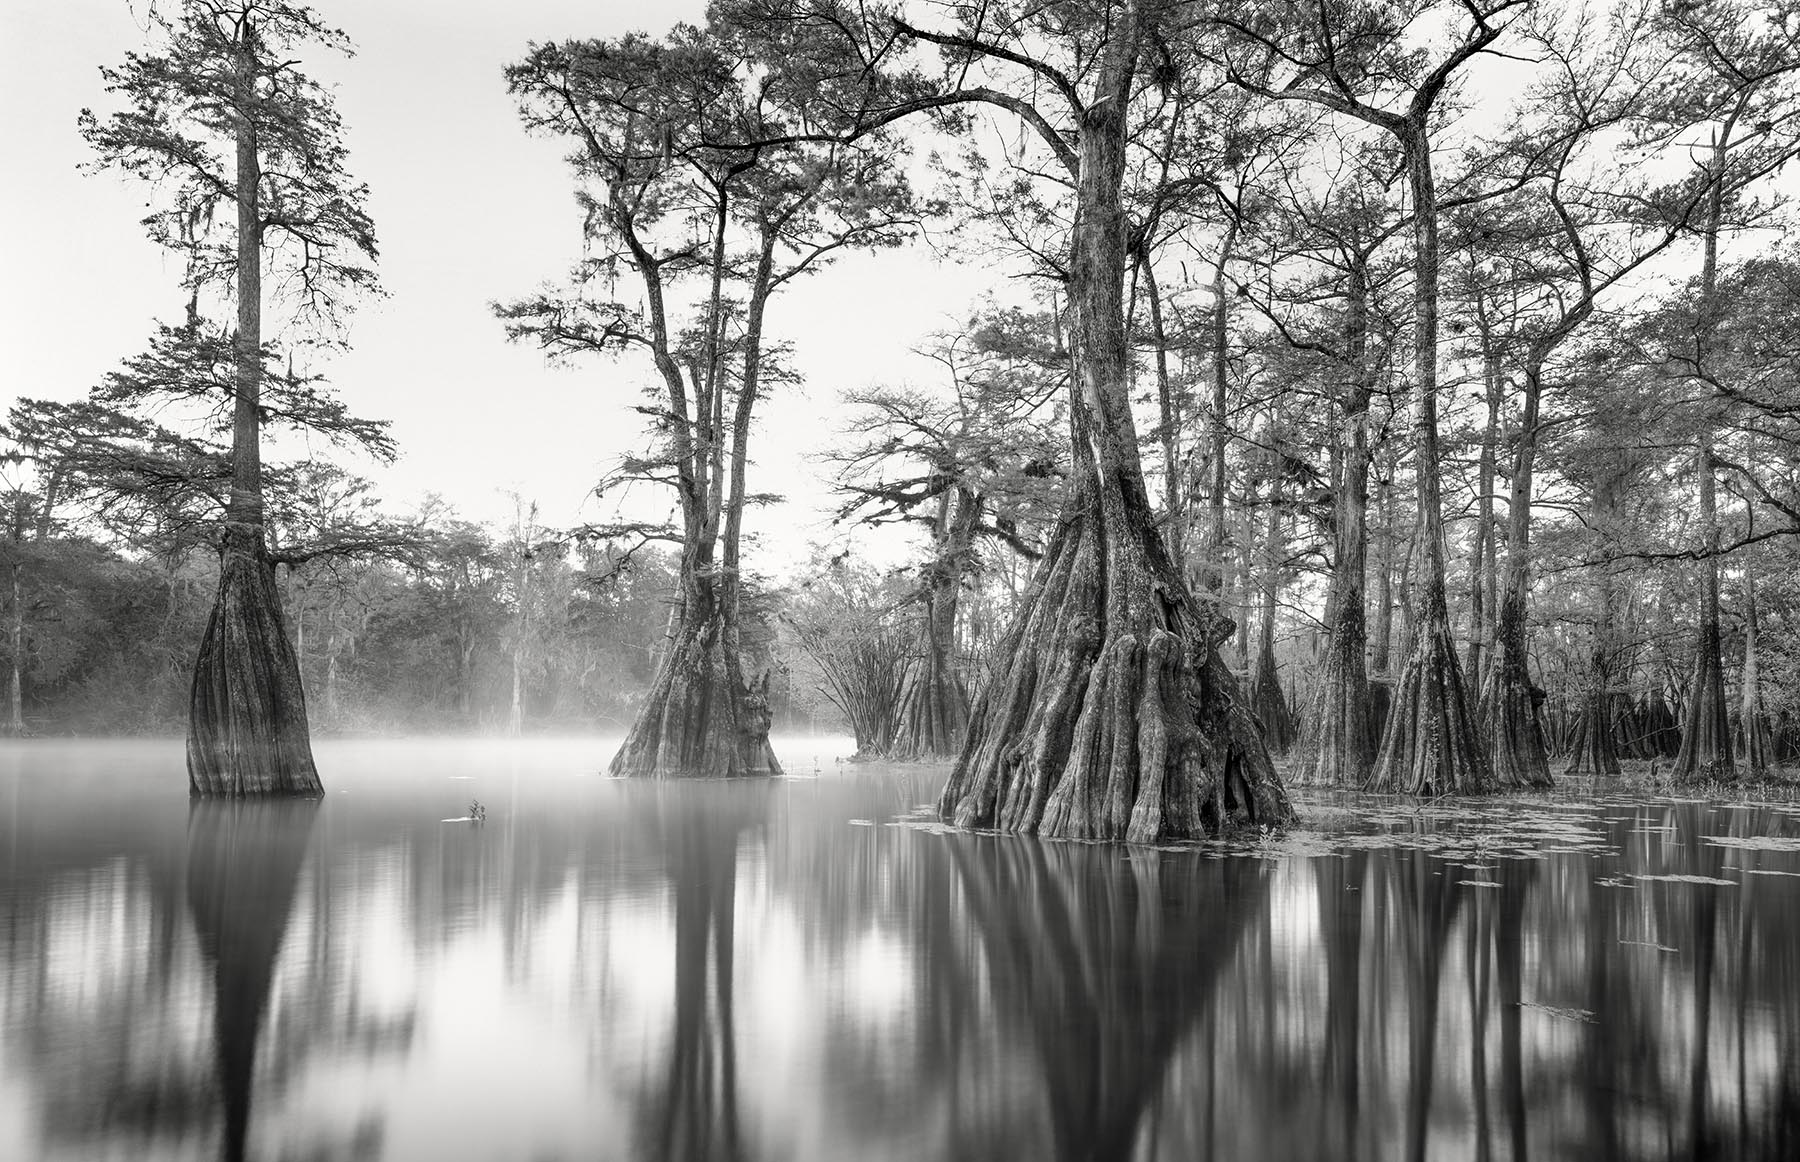 I found this scene on my first trip exploring the Suwannee River Valley. My friend Kevin and I discovered this spot late on our...